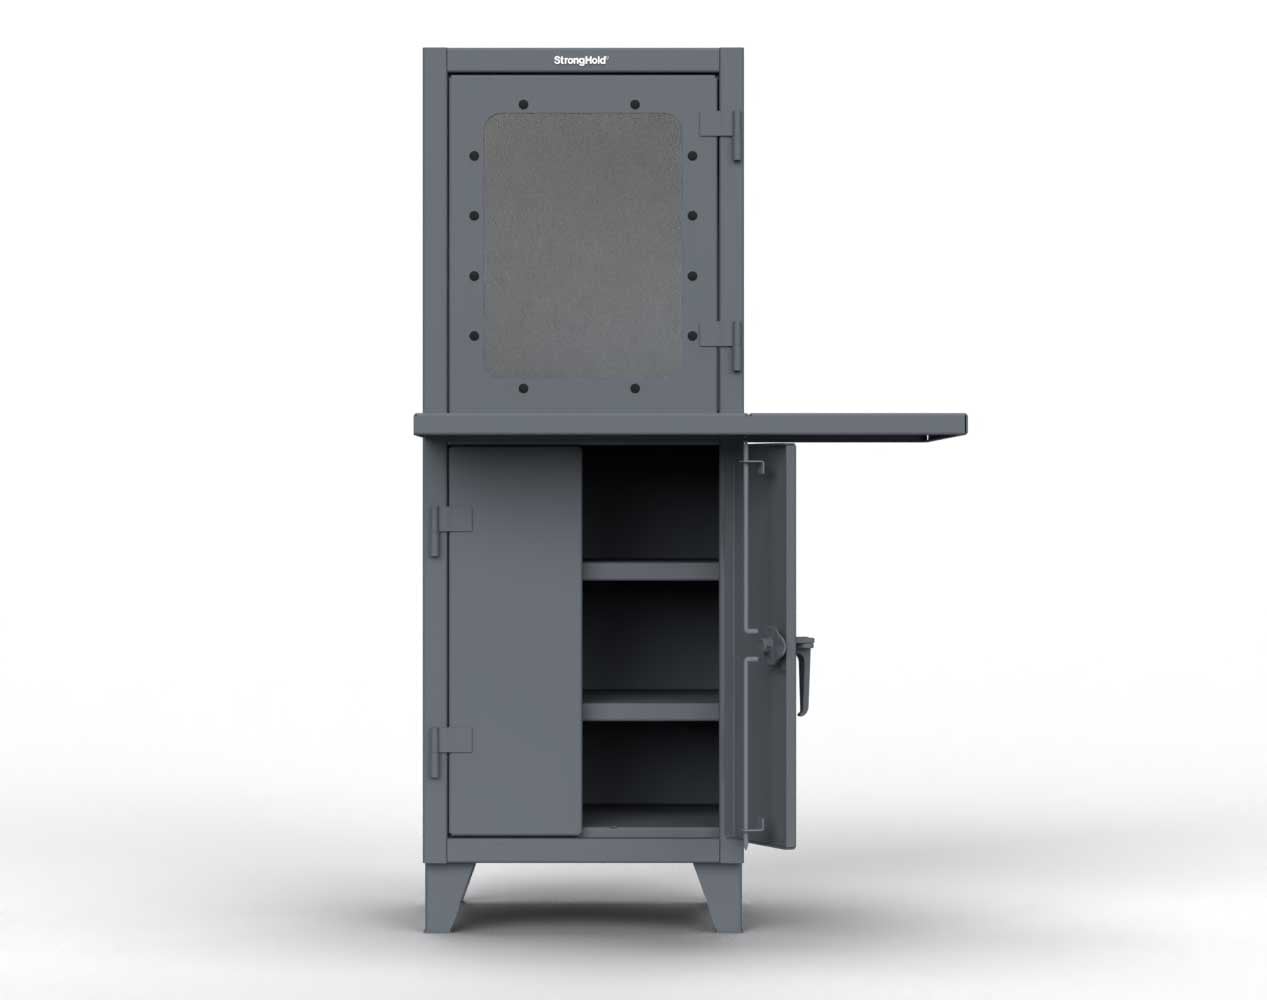 Extreme Duty 12 GA Computer Cabinet with 2 Workspaces, 2 Shelves - 26 In. W x 24 In. D x 72 In. H